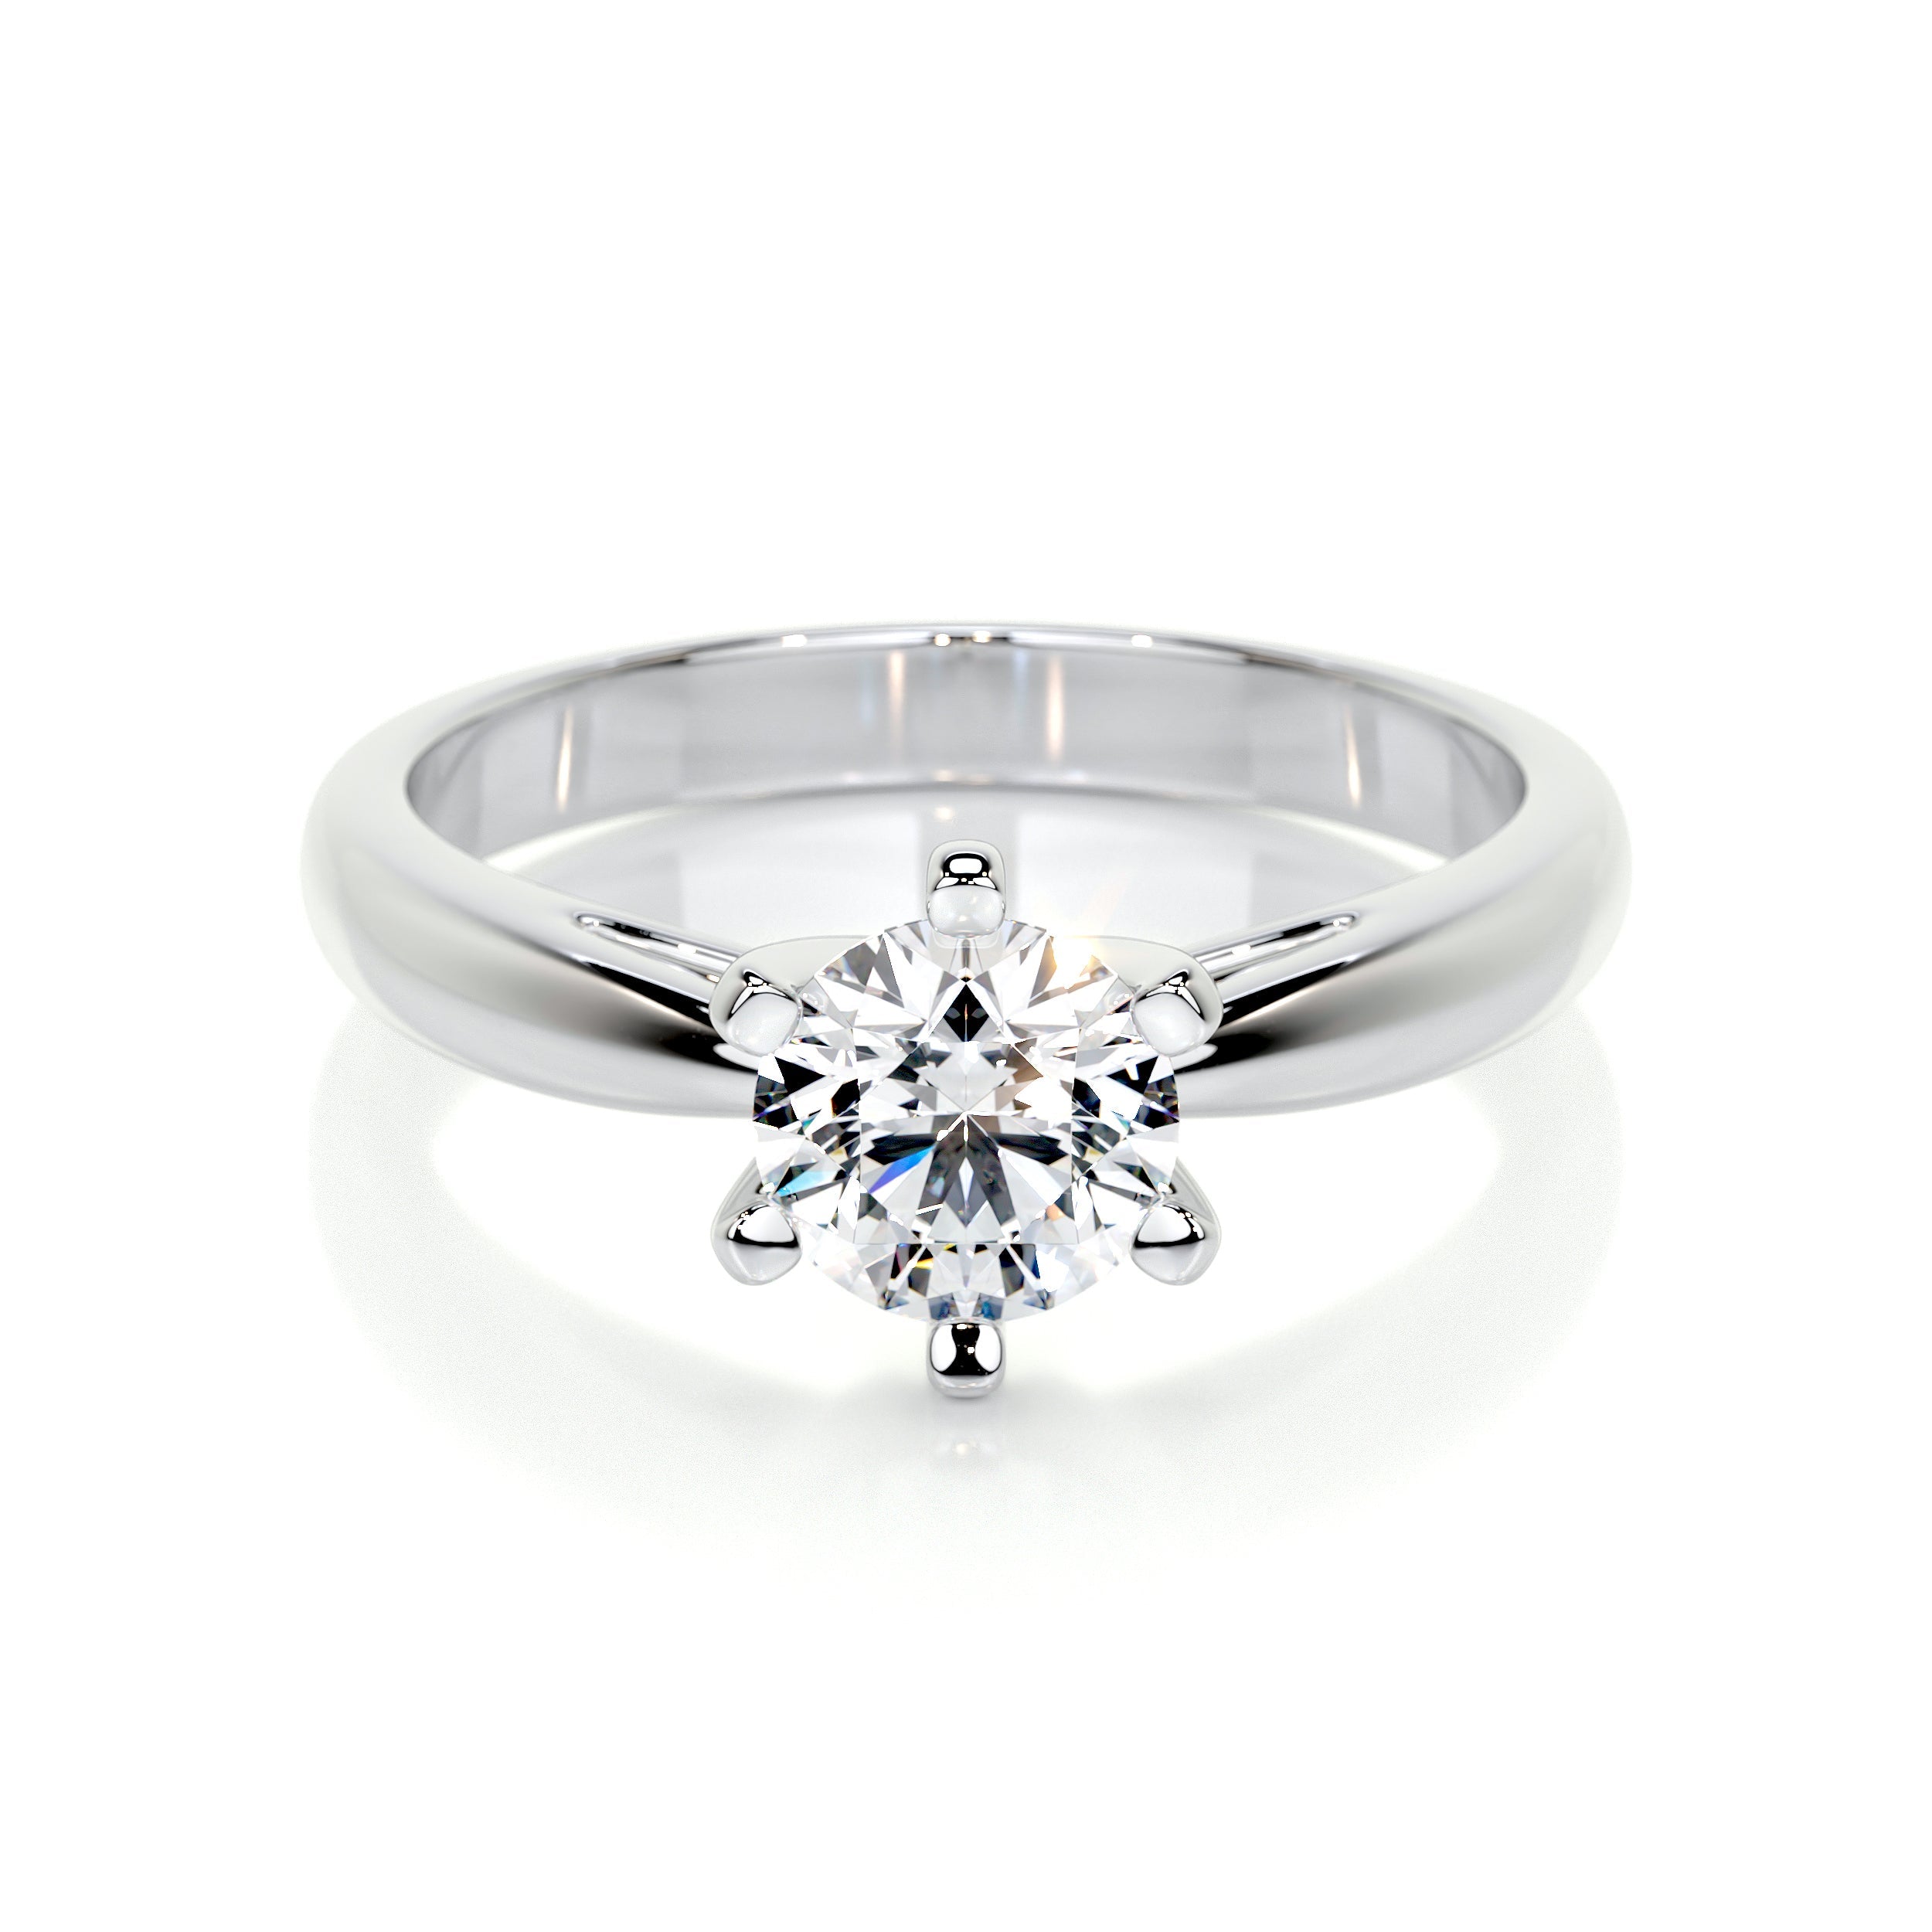 Buy Dodi's Engagement Ring - Princess Diana Comparable Jewelry at Amazon.in